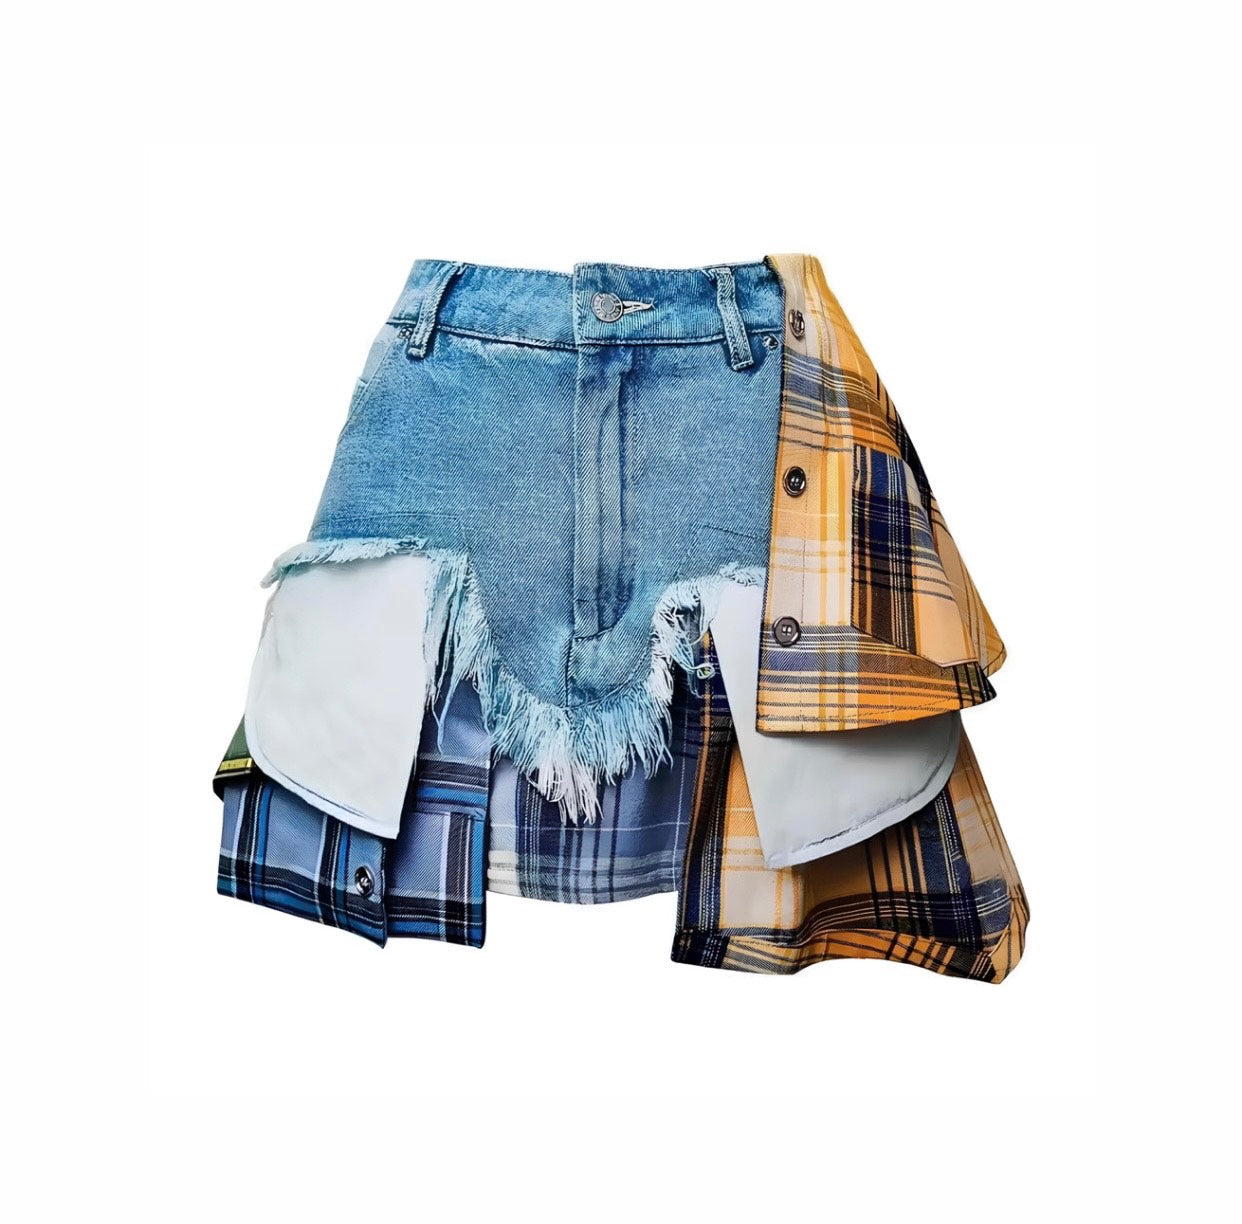 Contrasting plaid and denim skirt with a rebellious charm, perfect for young adults who value self-expression and individuality. Features a classic plaid pattern in bold colours, paired with distressed denim for a unique and eye-catching design. A nostalgic piece that holds memories, ideal for those who dare to be different.